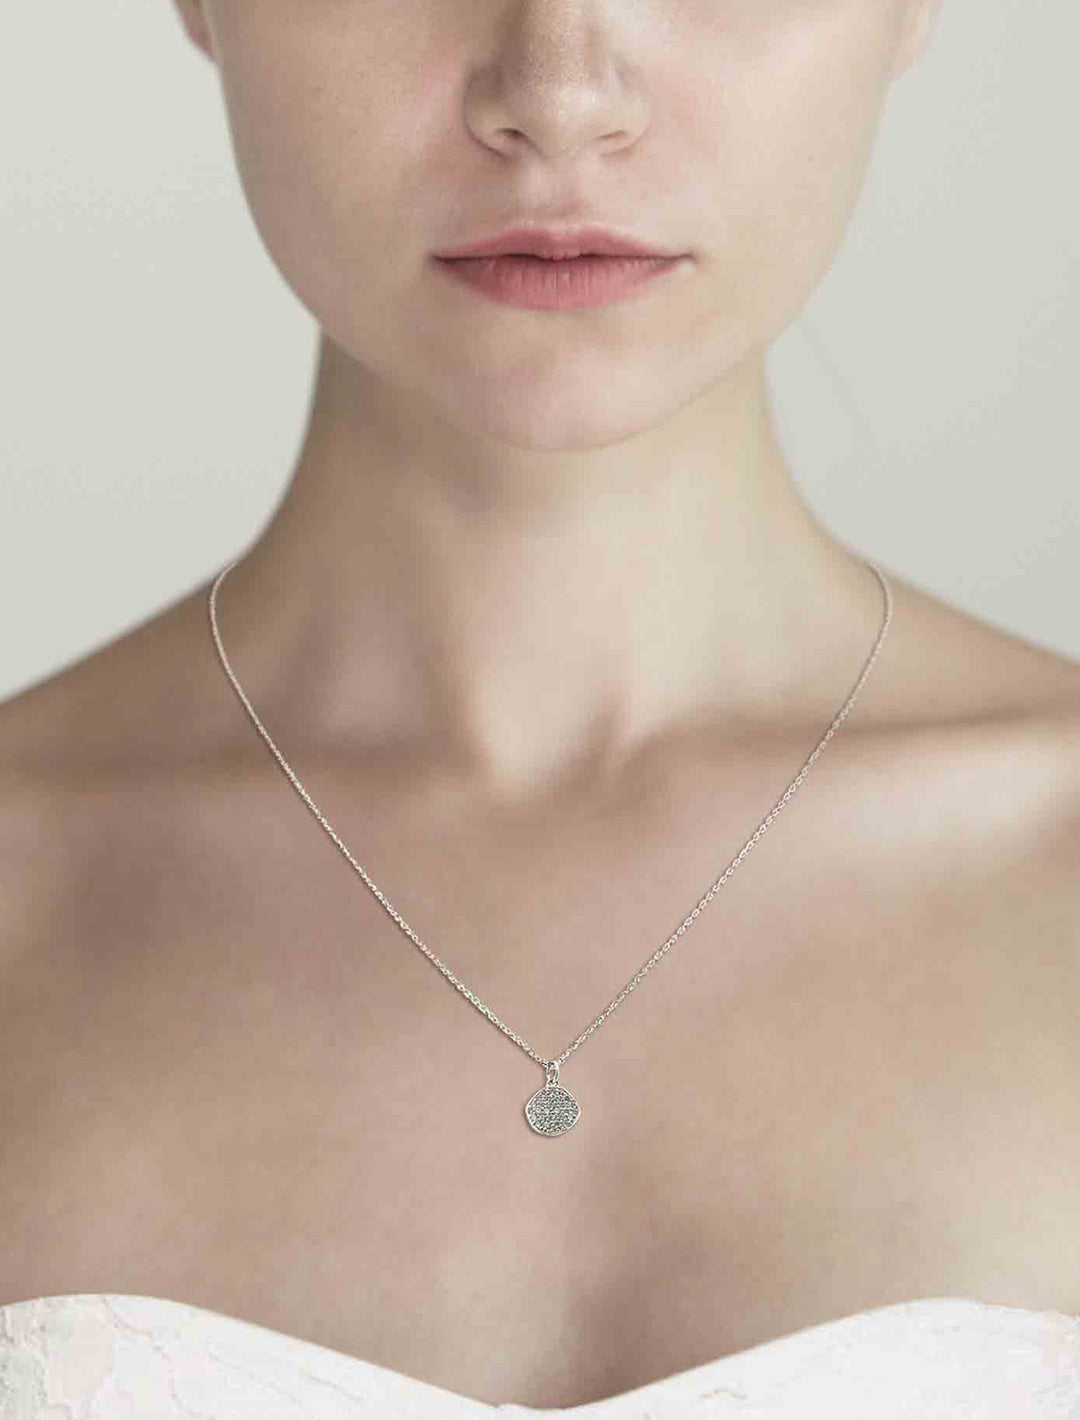 Model wearing Tai Jewelry's Silver Chain Necklace with CZ Wavy Disc.